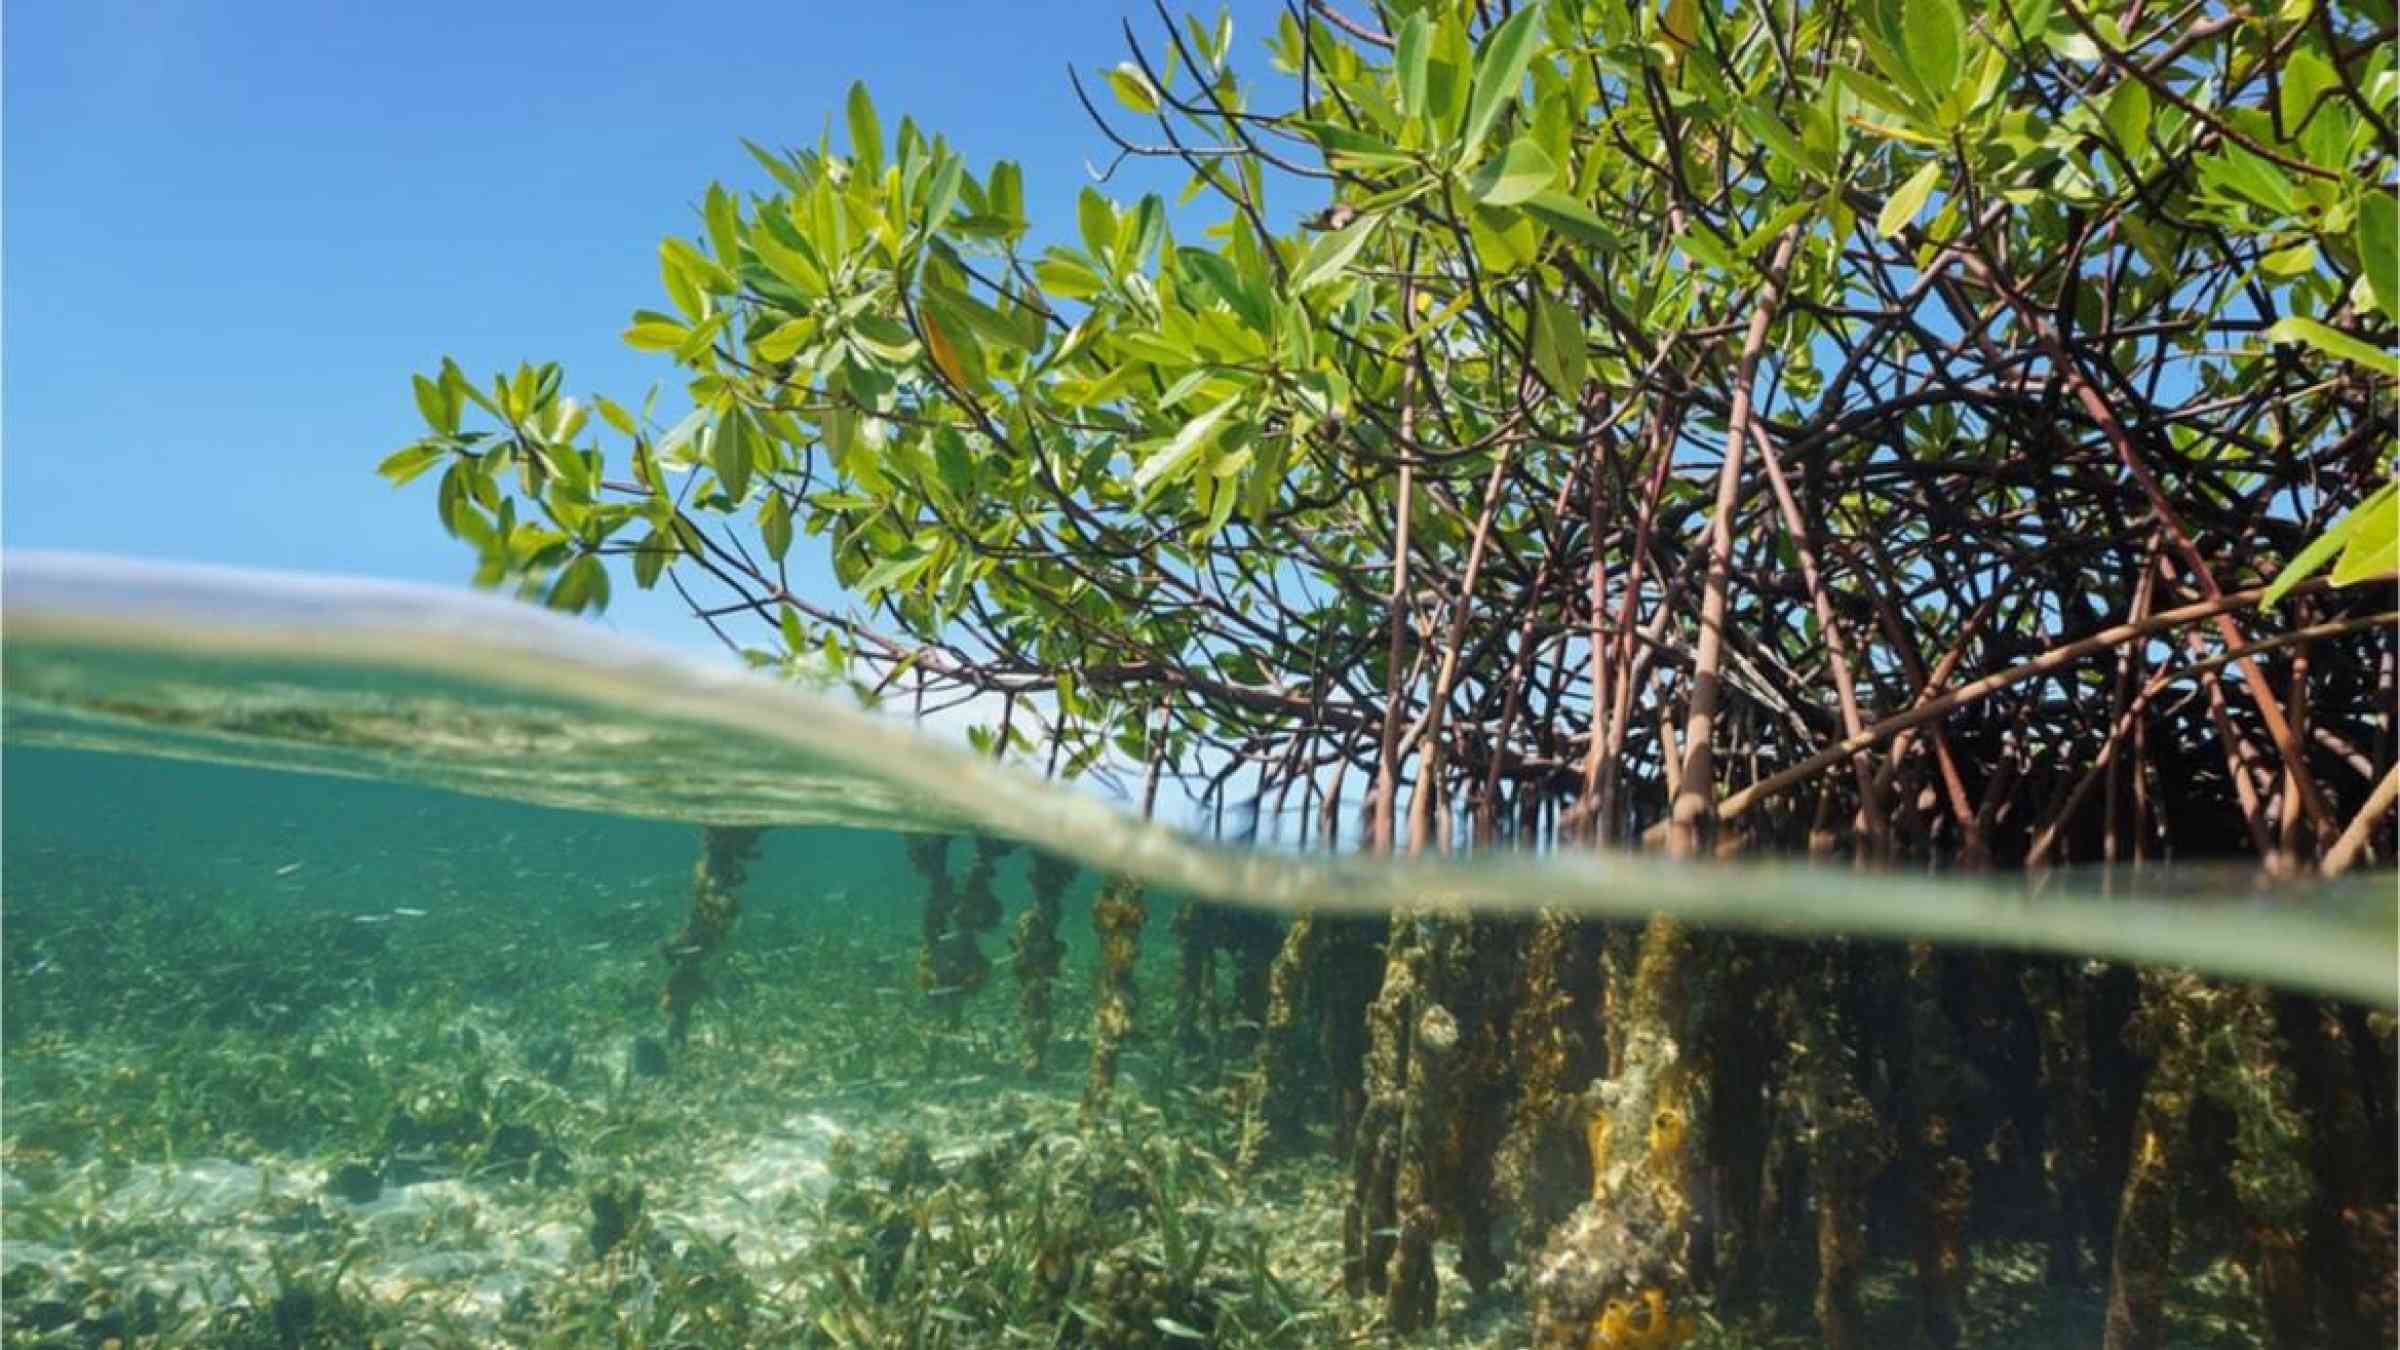 Mangroves and their roots